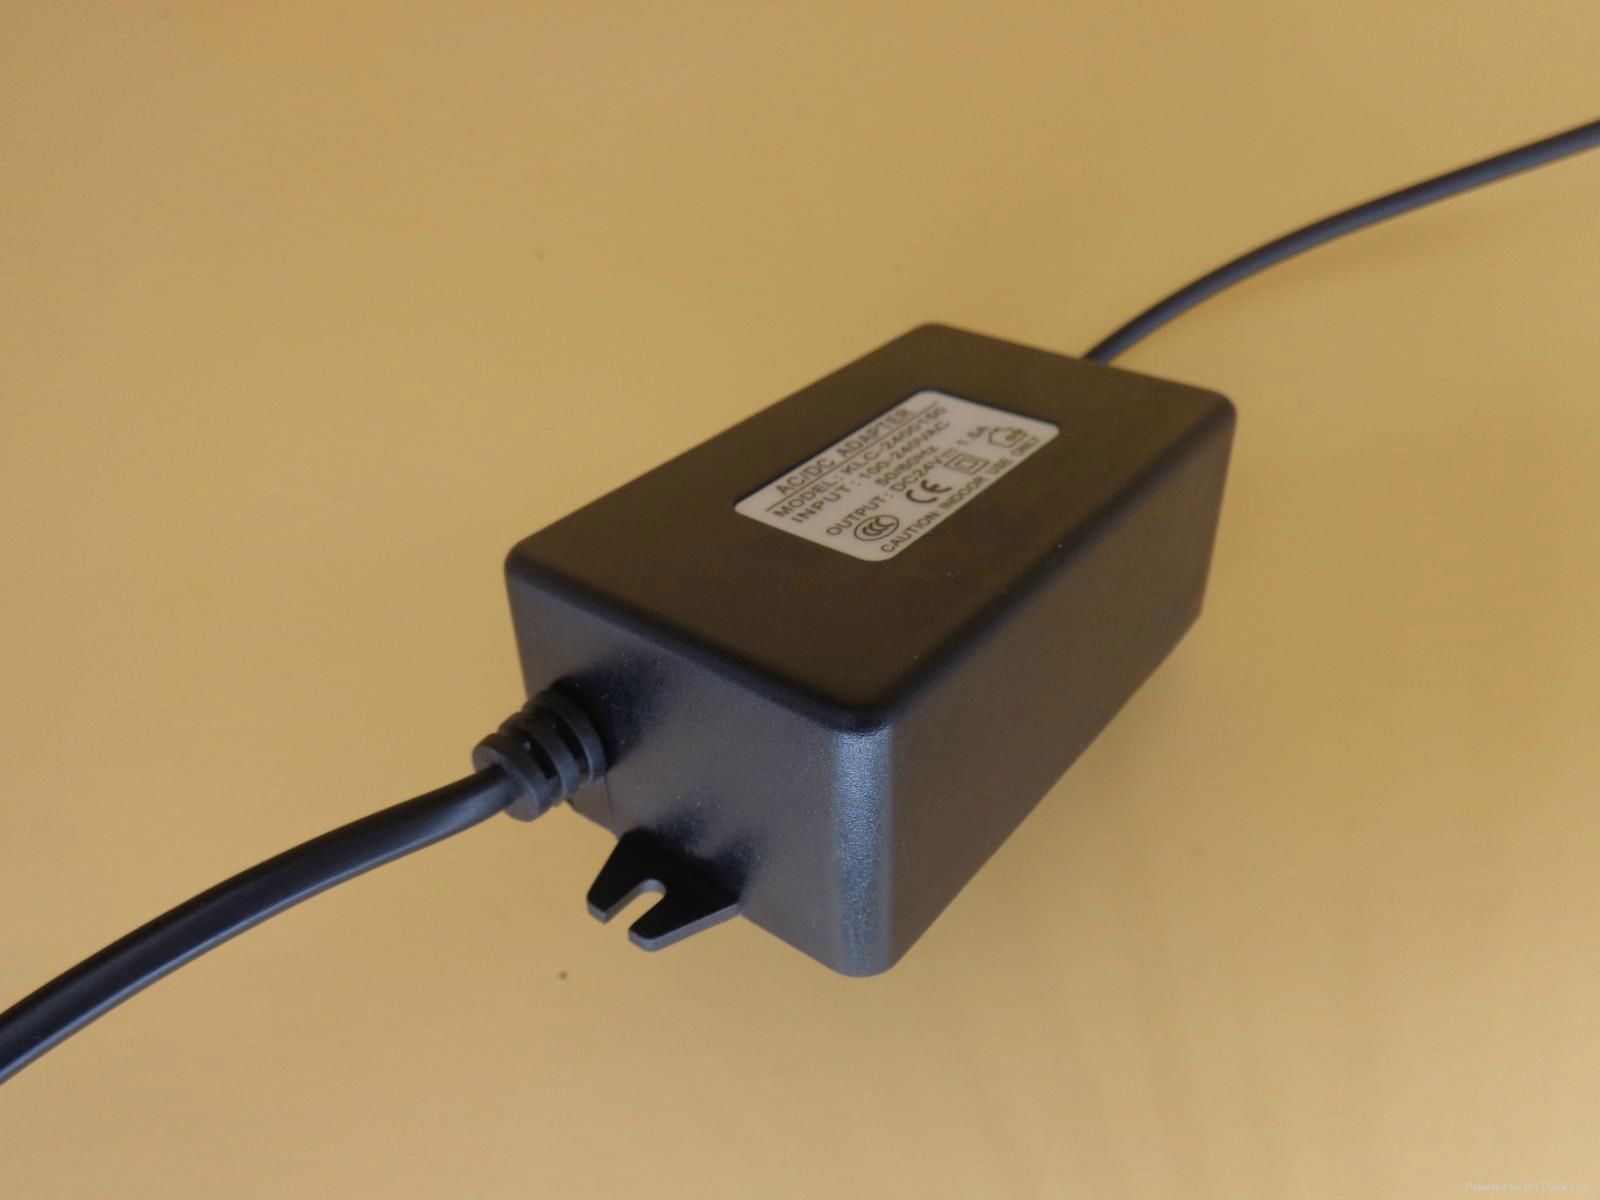 24v 1.5a ac/dc power adapter&adaptor for water purifier